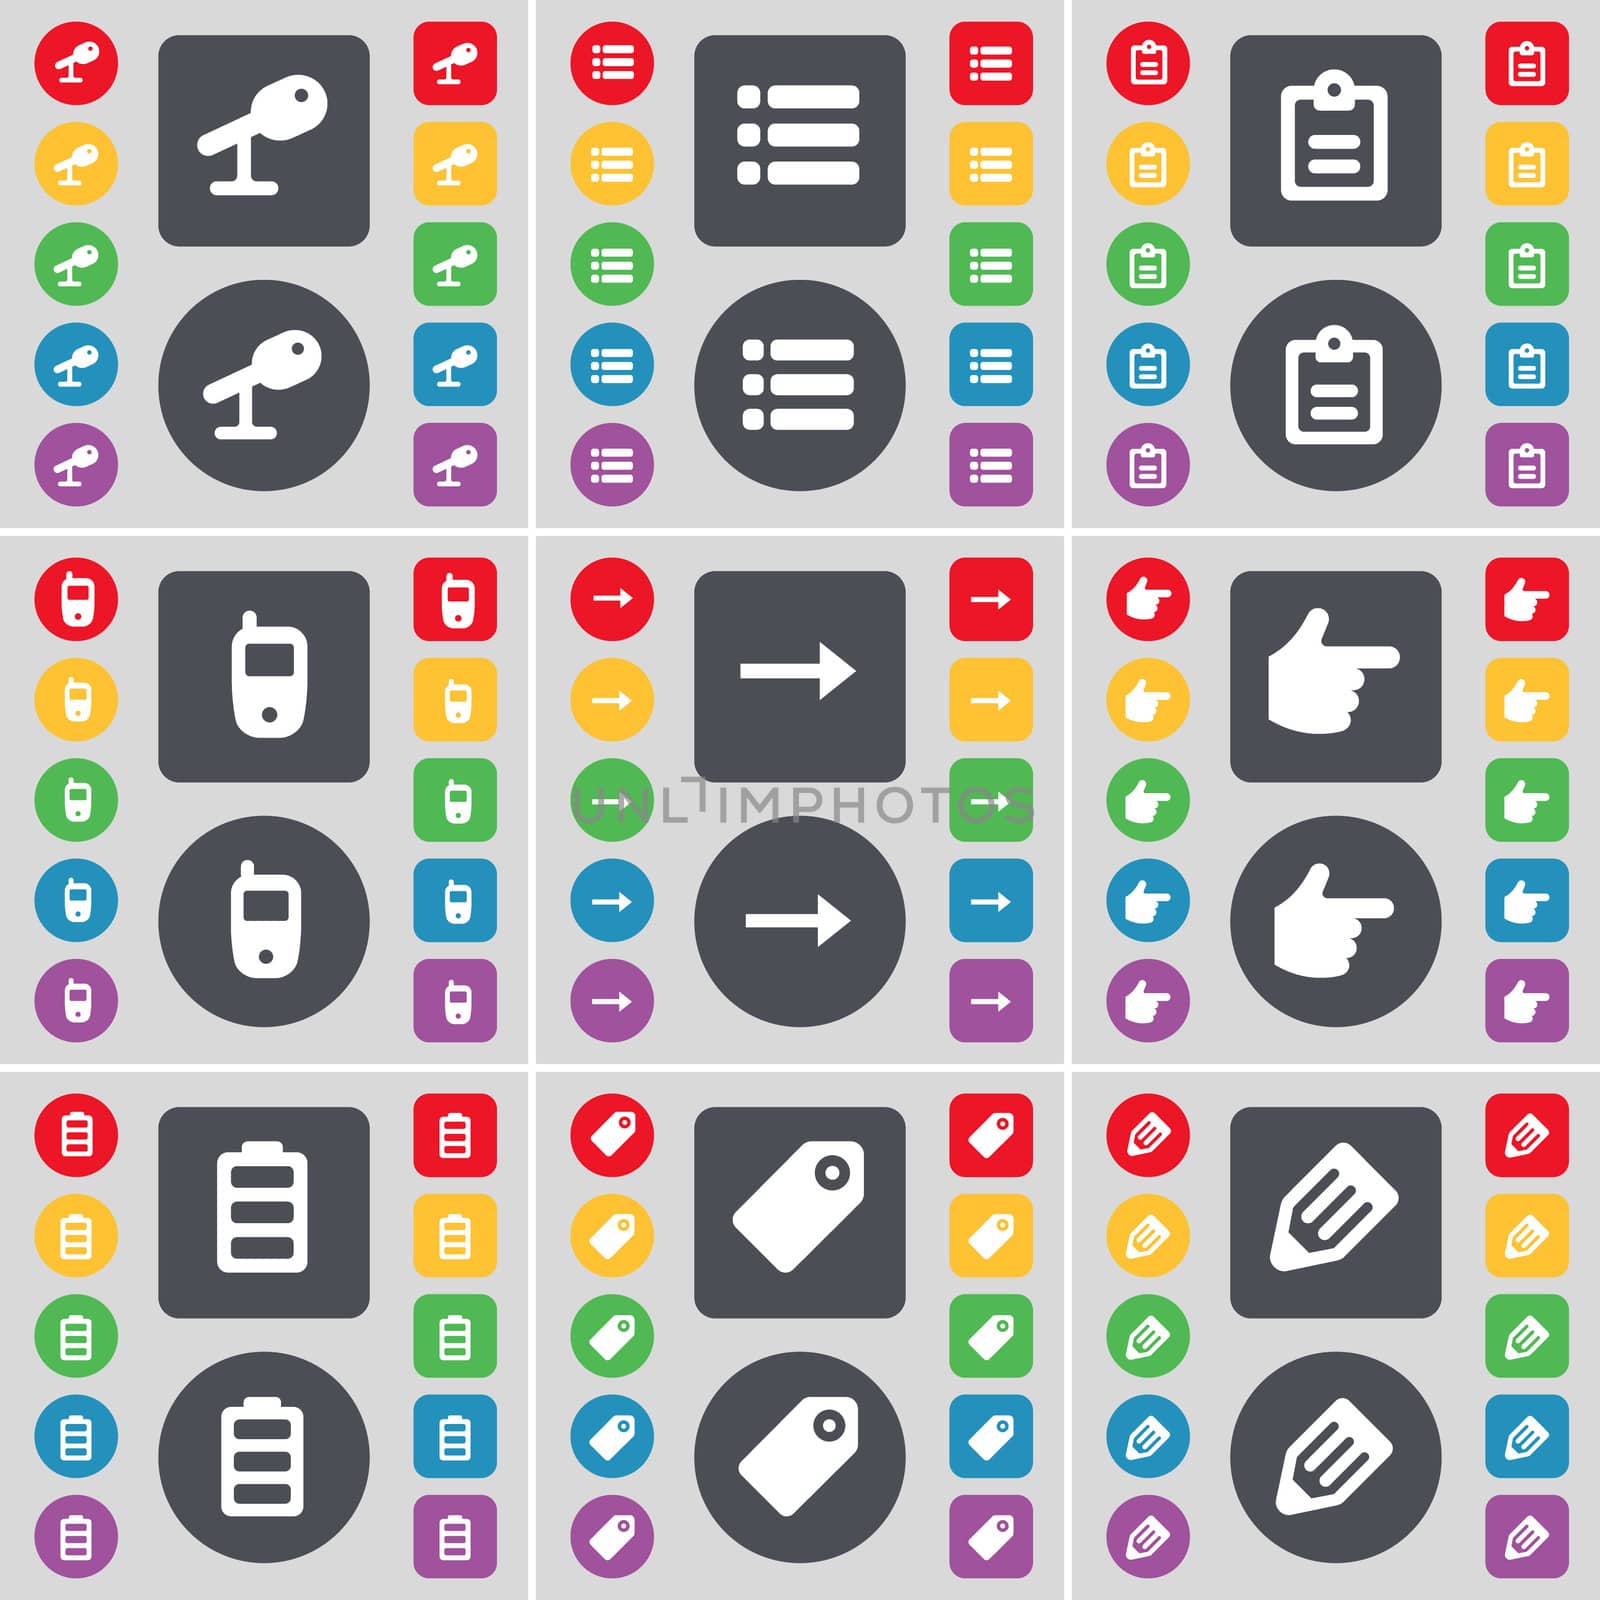 Microphone, List, Survey, Mobile phone, Arrow right, Hand, Battery, Tag, Pencil icon symbol. A large set of flat, colored buttons for your design. illustration